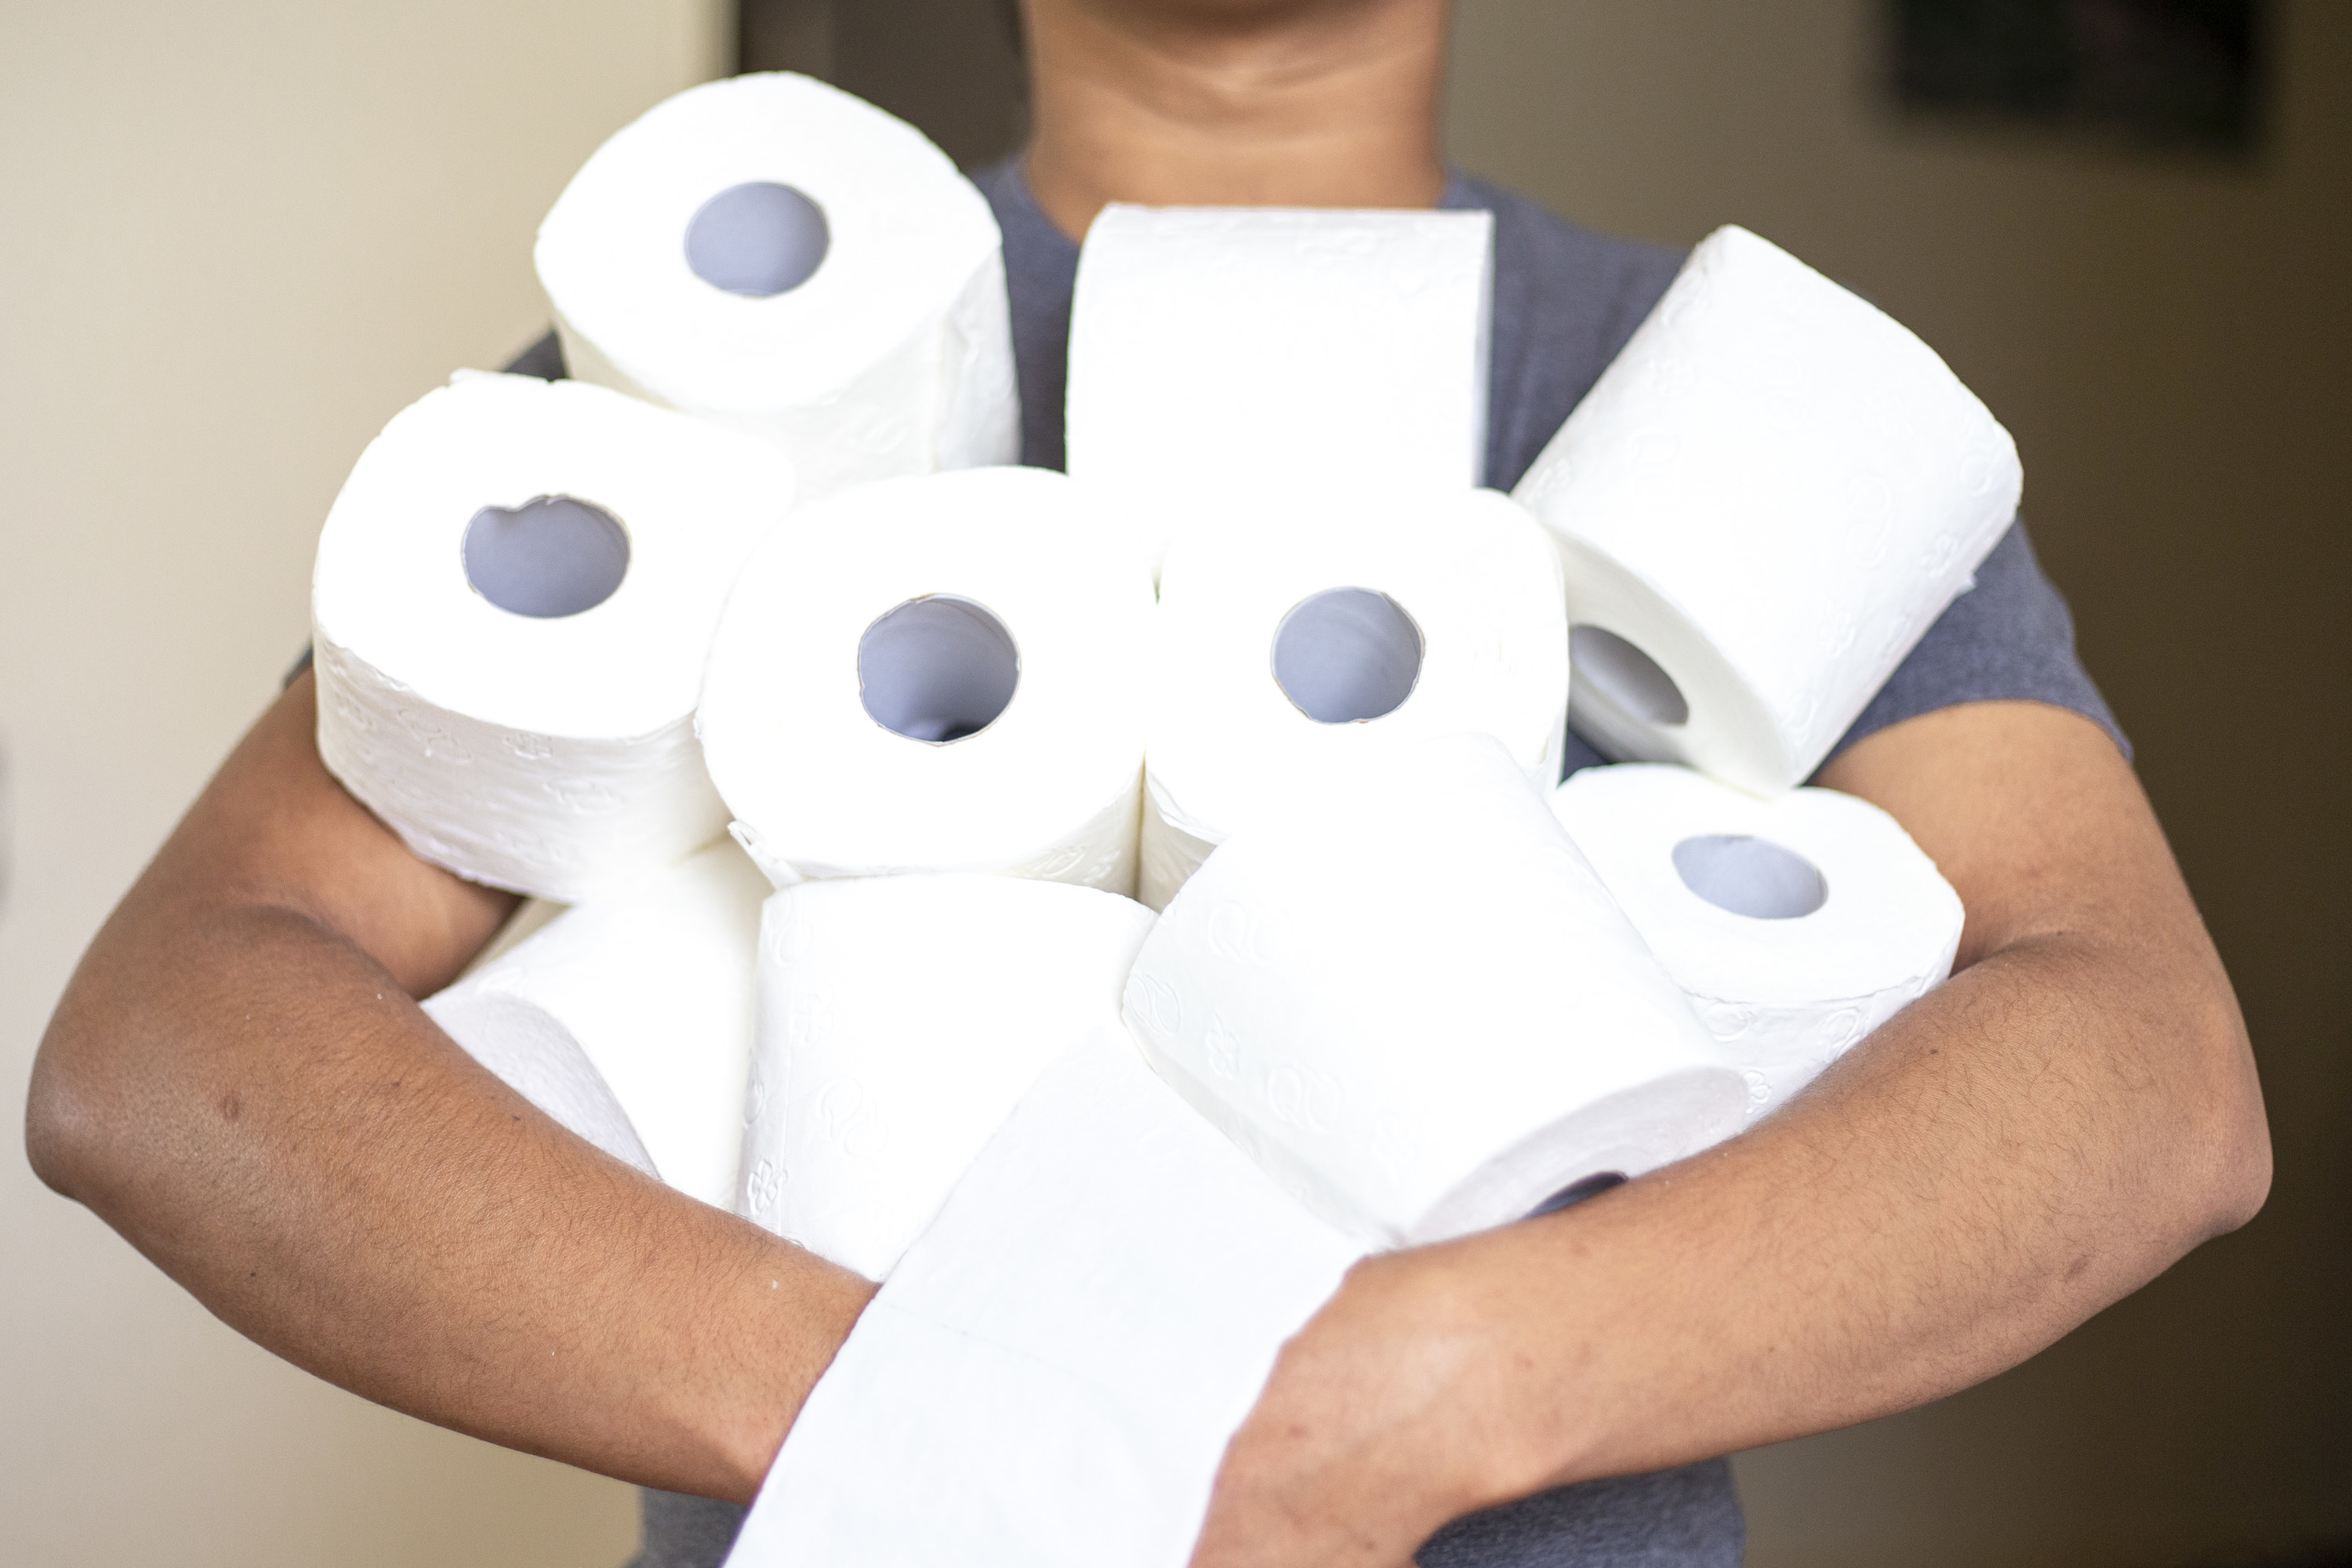 Person holding about 10 rolls of toilet paper in their arms